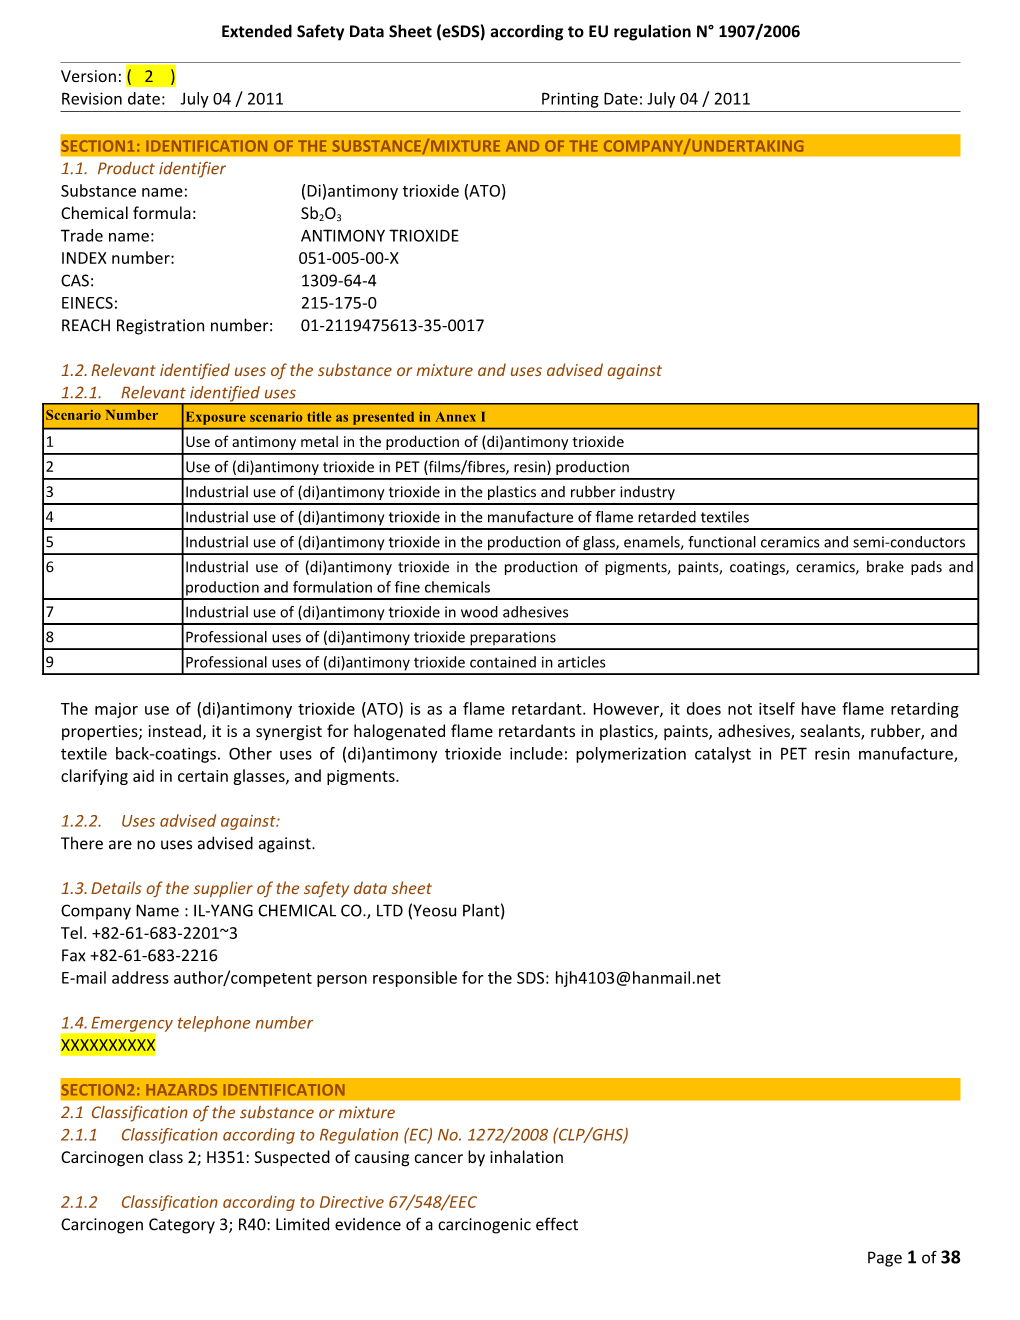 Extended Safety Data Sheet (Esds) According to EU Regulation N 1907/2006